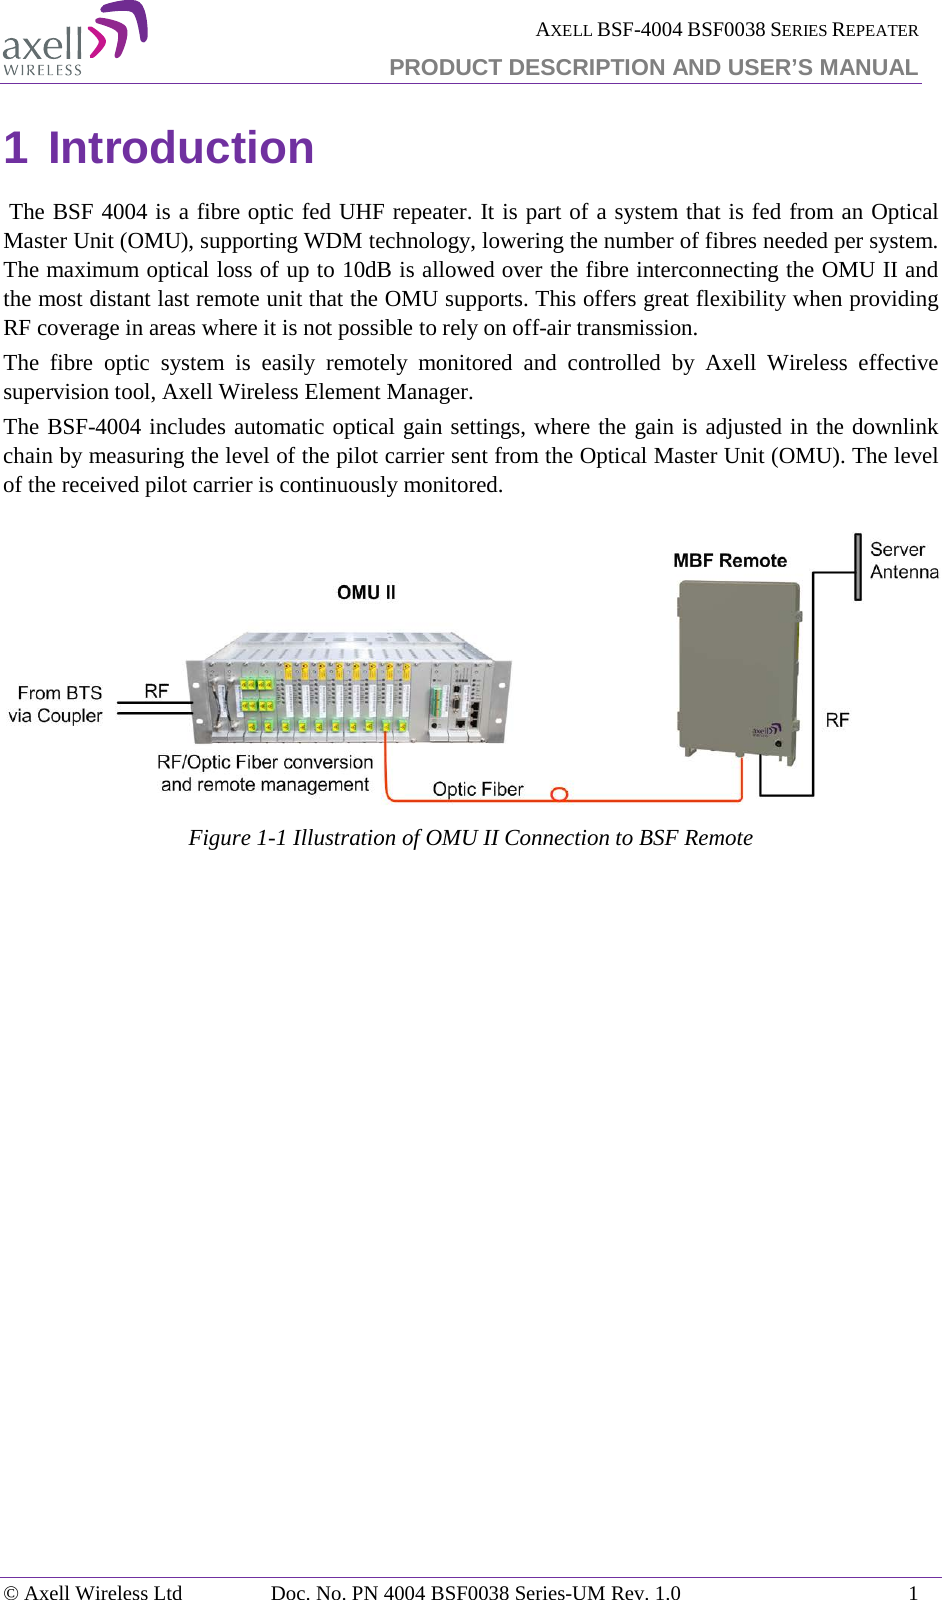  AXELL BSF-4004 BSF0038 SERIES REPEATER PRODUCT DESCRIPTION AND USER’S MANUAL 1 Introduction   The BSF 4004 is a fibre optic fed UHF repeater. It is part of a system that is fed from an Optical Master Unit (OMU), supporting WDM technology, lowering the number of fibres needed per system.  The maximum optical loss of up to 10dB is allowed over the fibre interconnecting the OMU II and the most distant last remote unit that the OMU supports. This offers great flexibility when providing RF coverage in areas where it is not possible to rely on off-air transmission.  The fibre optic system is easily remotely monitored and controlled by Axell Wireless effective supervision tool, Axell Wireless Element Manager. The BSF-4004 includes automatic optical gain settings, where the gain is adjusted in the downlink chain by measuring the level of the pilot carrier sent from the Optical Master Unit (OMU). The level of the received pilot carrier is continuously monitored.  Figure  1-1 Illustration of OMU II Connection to BSF Remote     © Axell Wireless Ltd Doc. No. PN 4004 BSF0038 Series-UM Rev. 1.0  1 